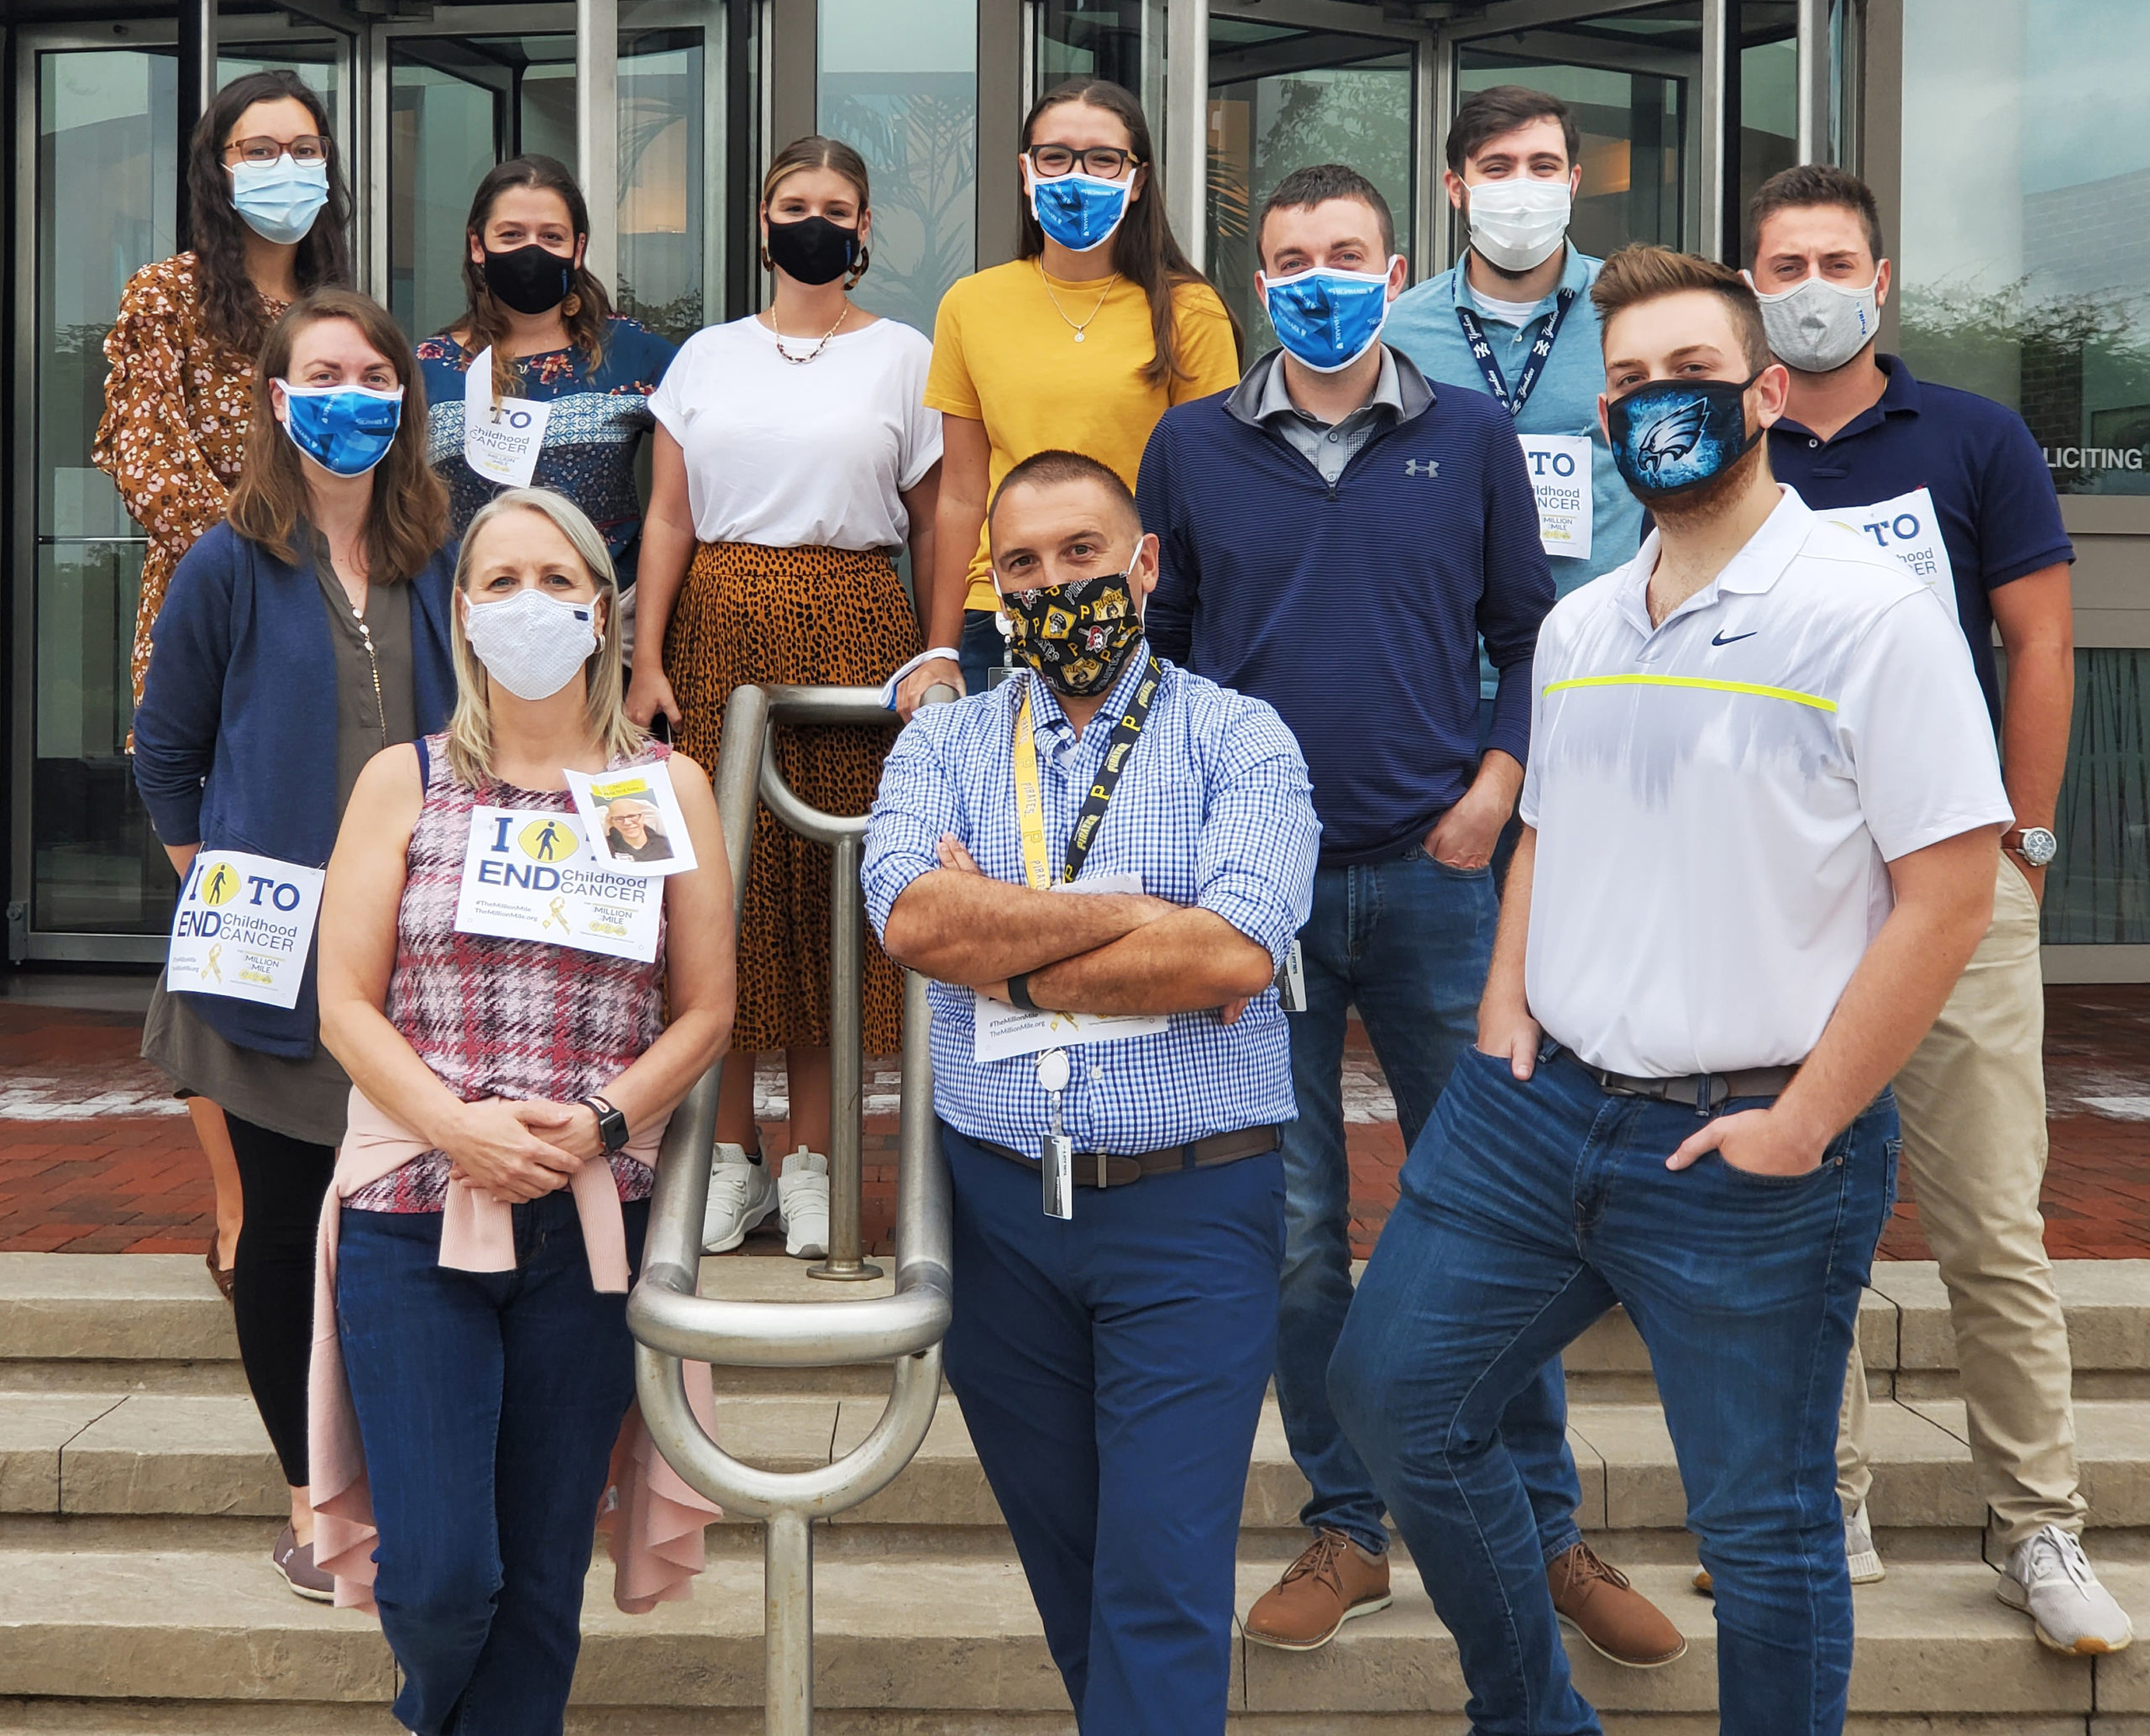 TRIOSE employees wearing wearing masks, attending medical charity event